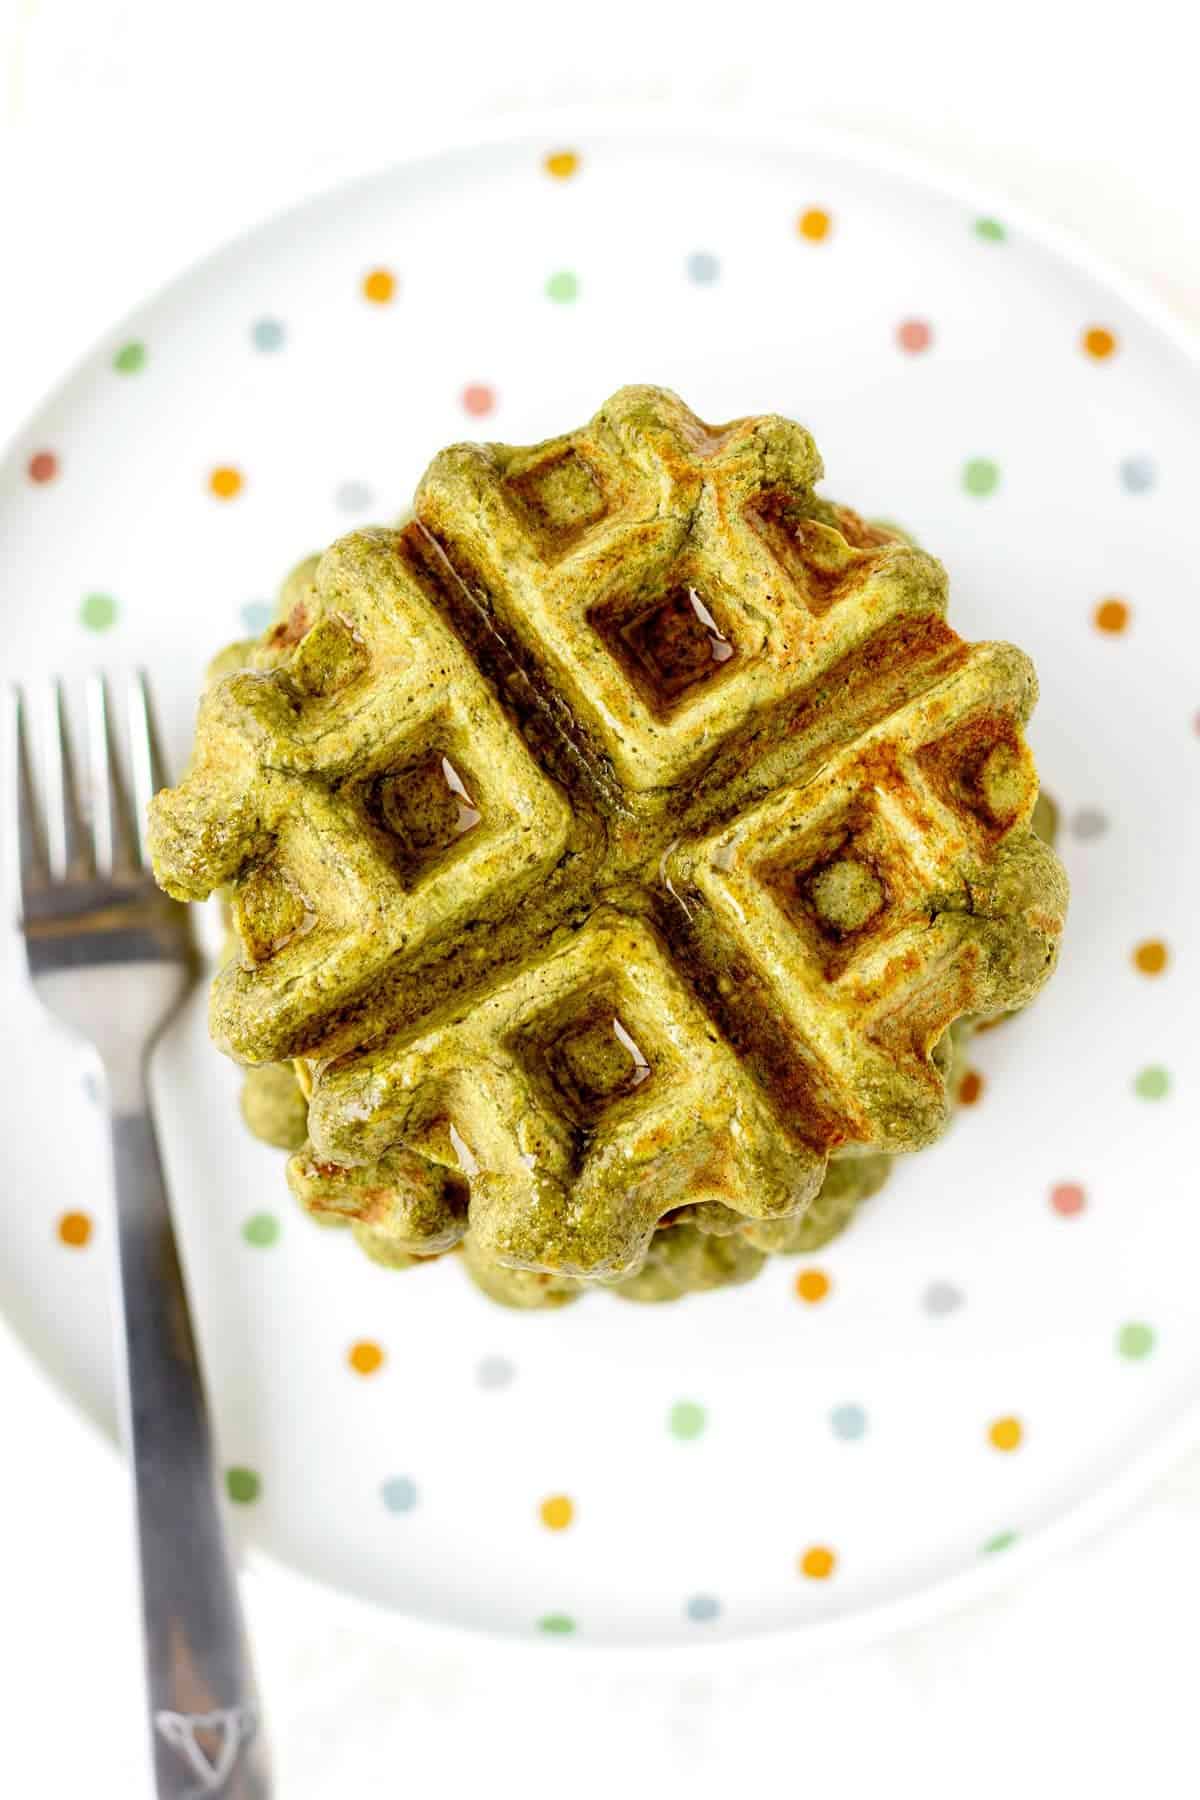 A spinach banana waffle on a polka dot plate next to a fork.